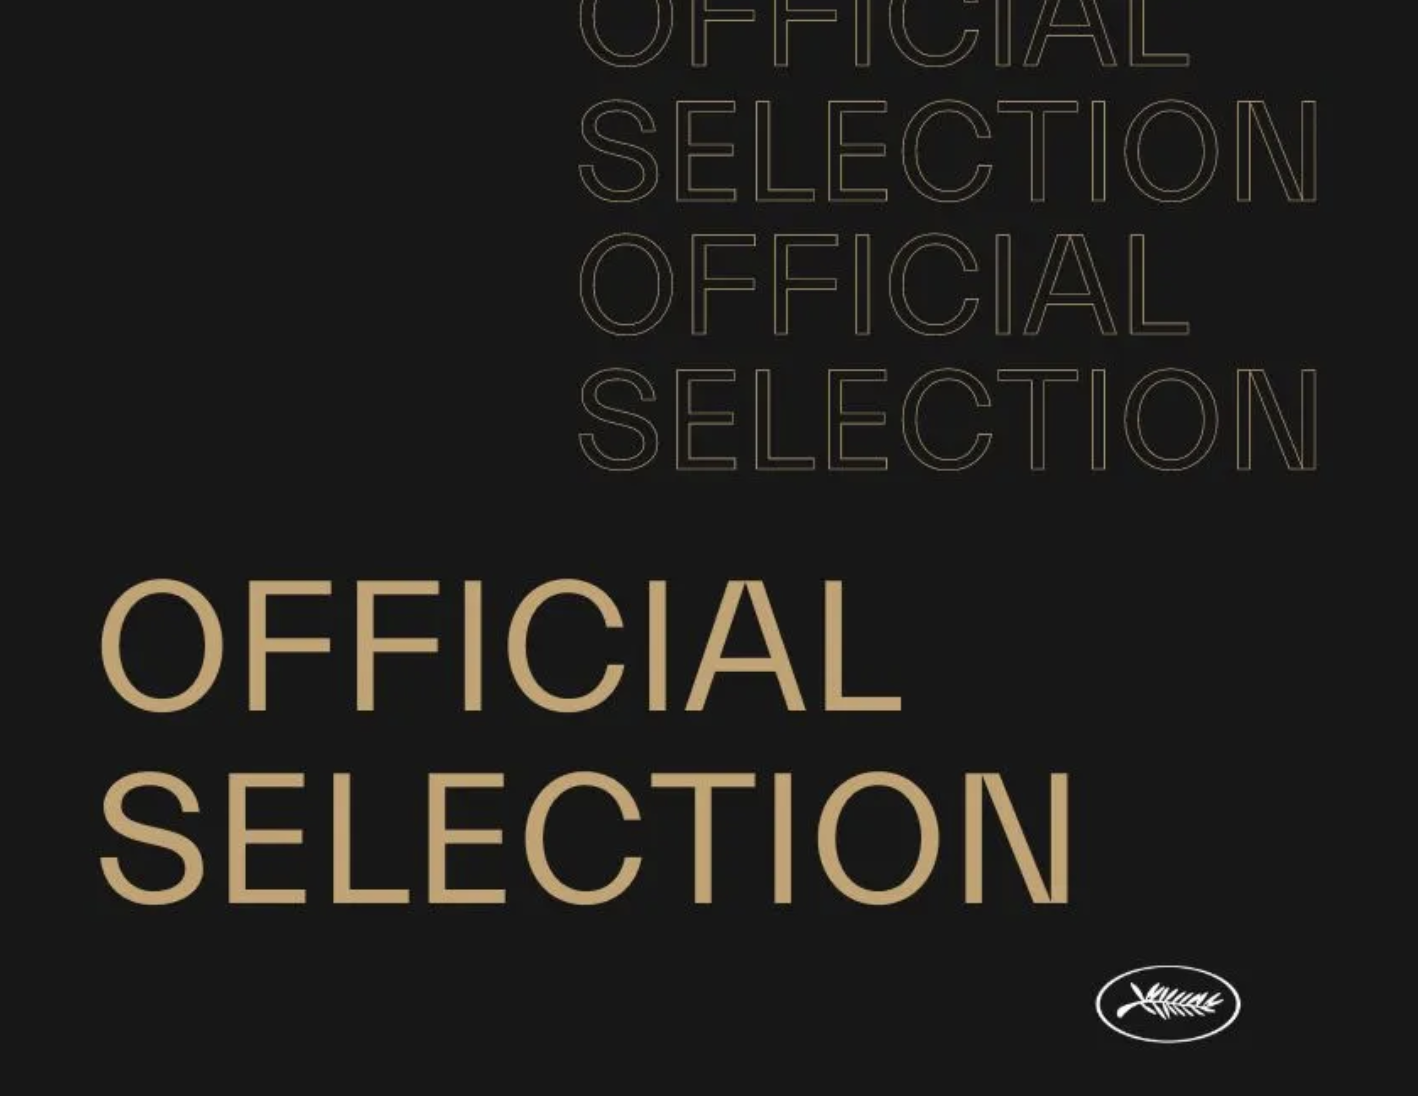 The Official Selection of the 76th Festival de Cannes unveiled